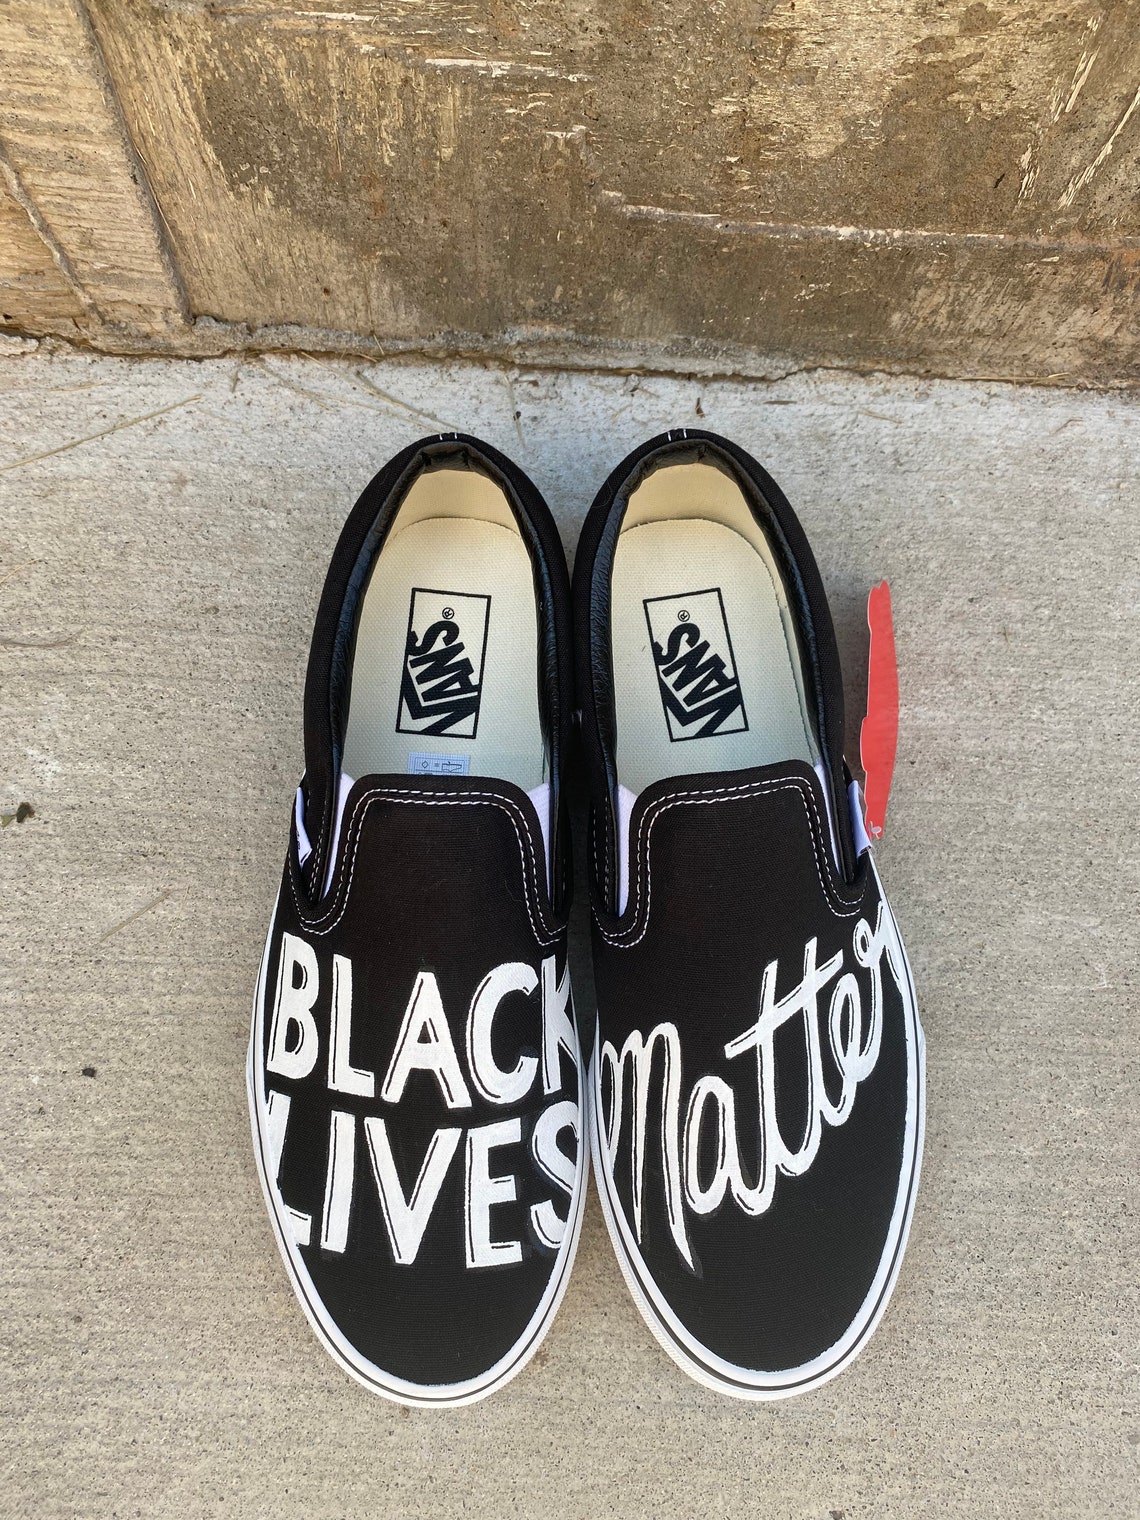 Custom Hand-Painted Black Lives Matter Shoes Donation | Etsy